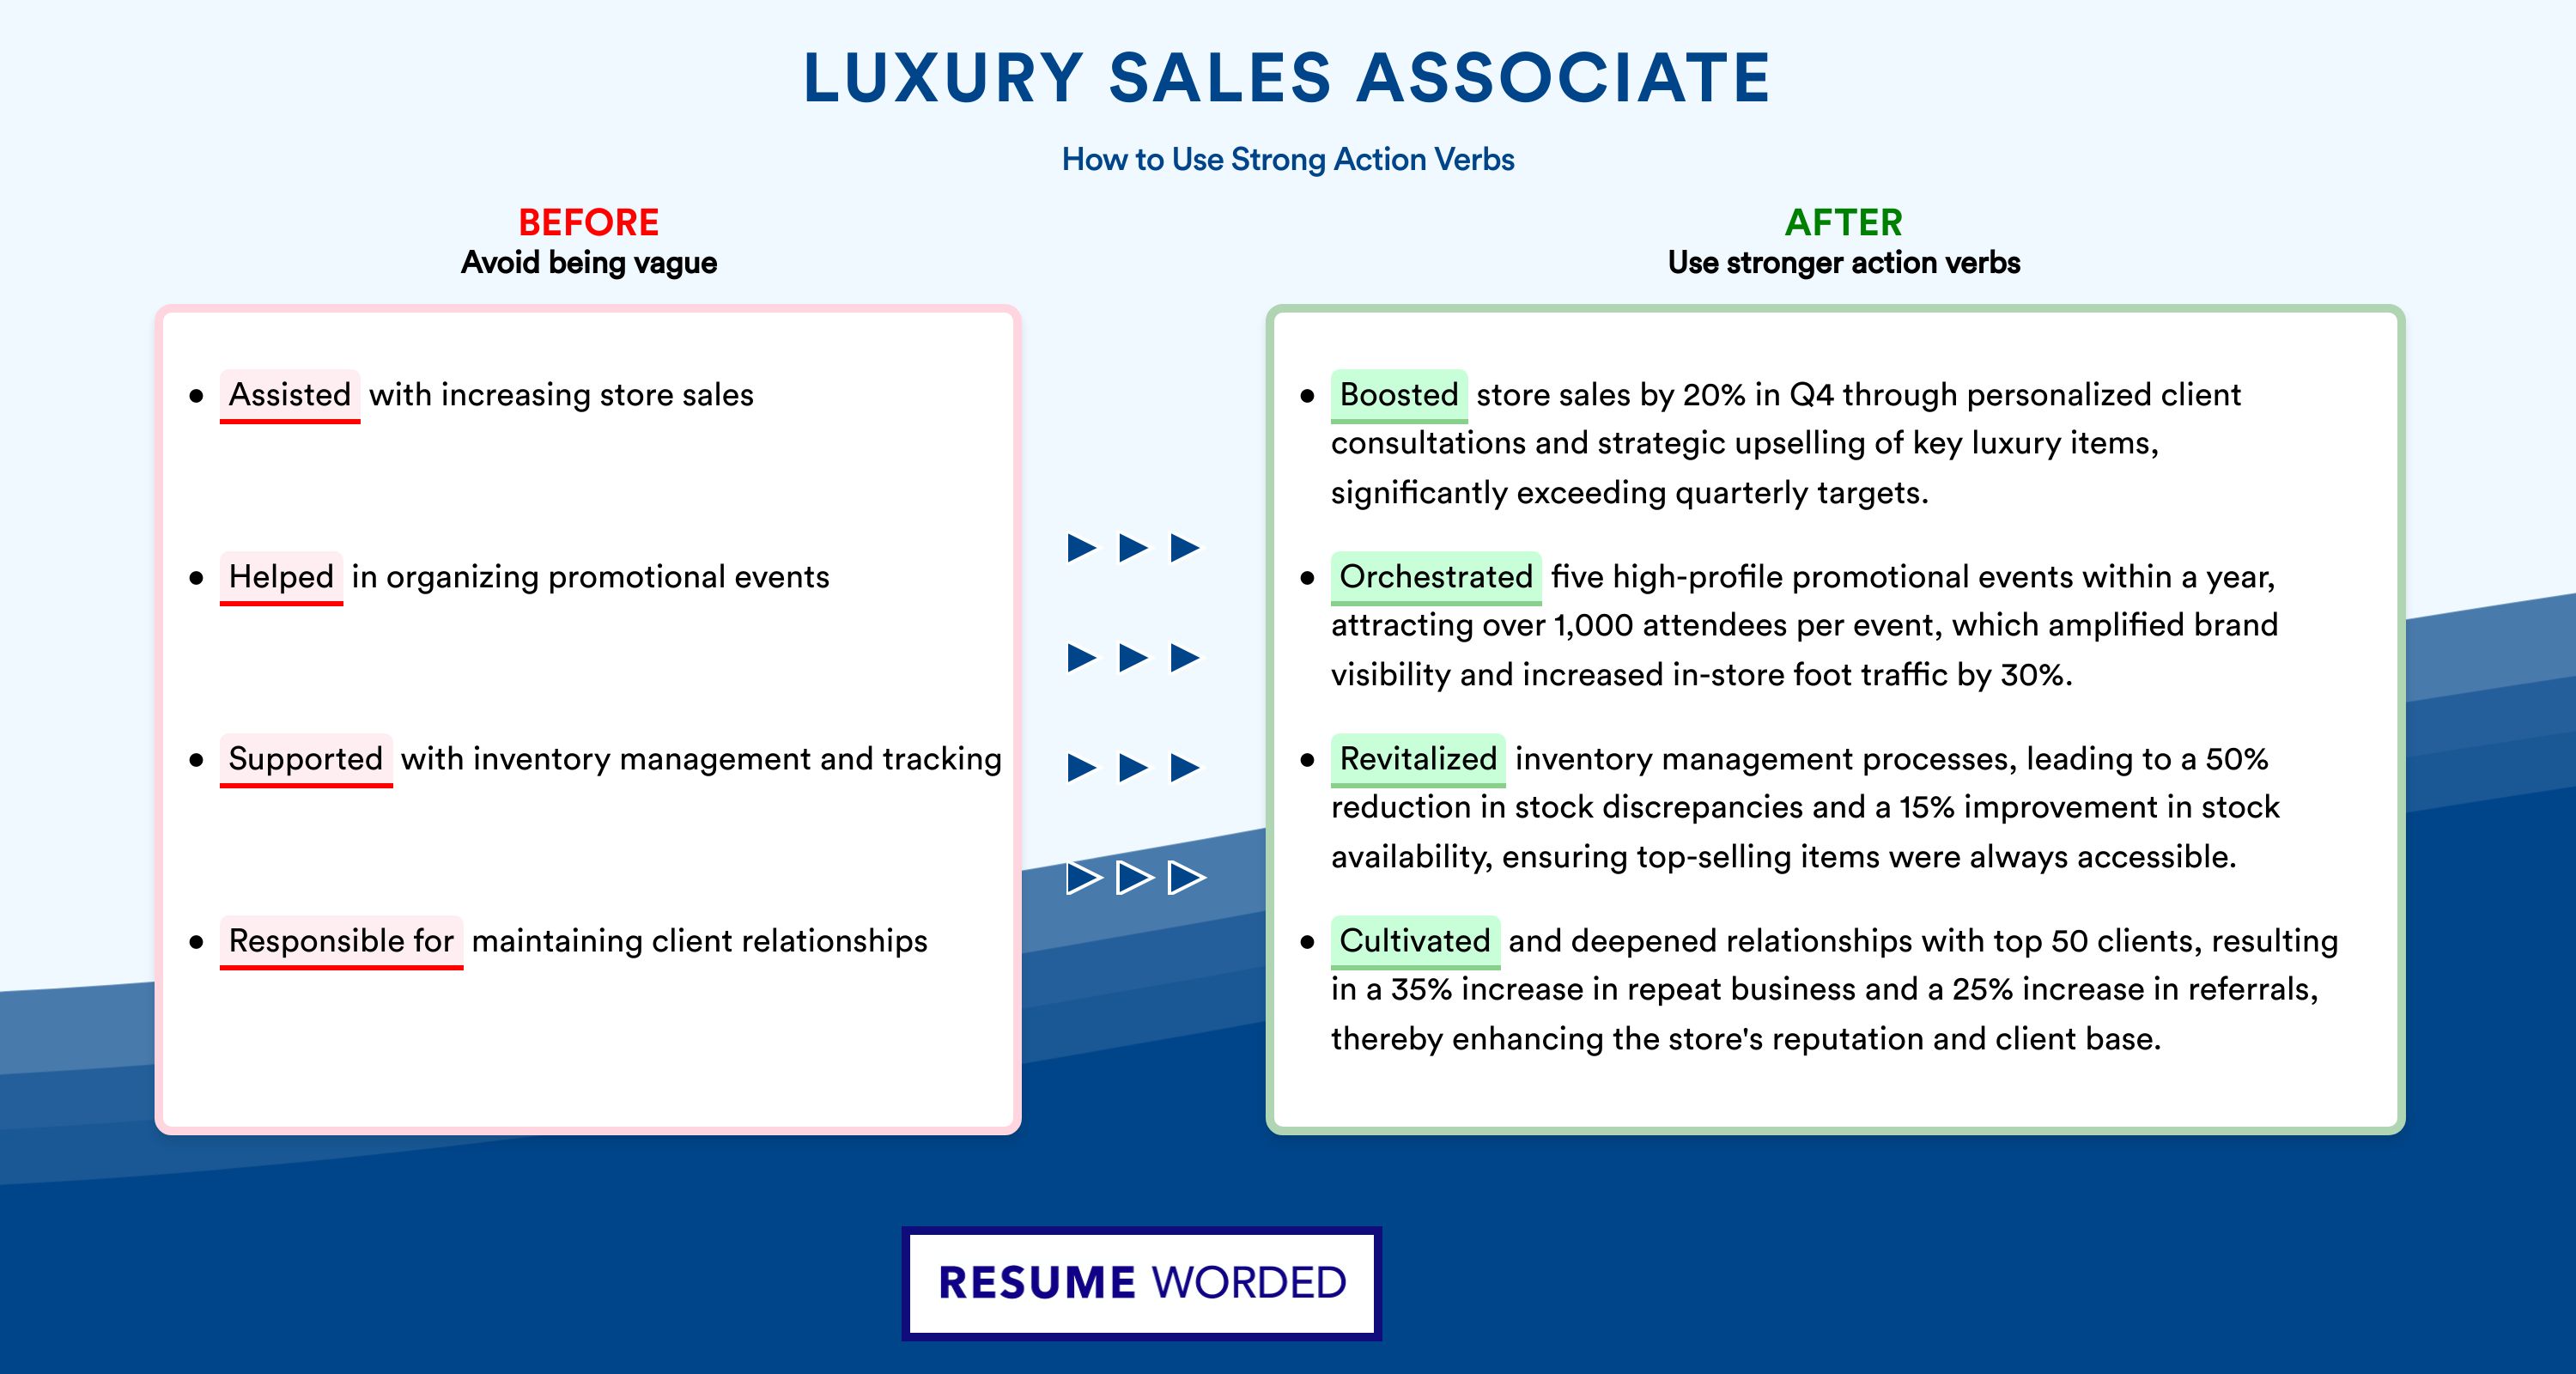 Action Verbs for Luxury Sales Associate